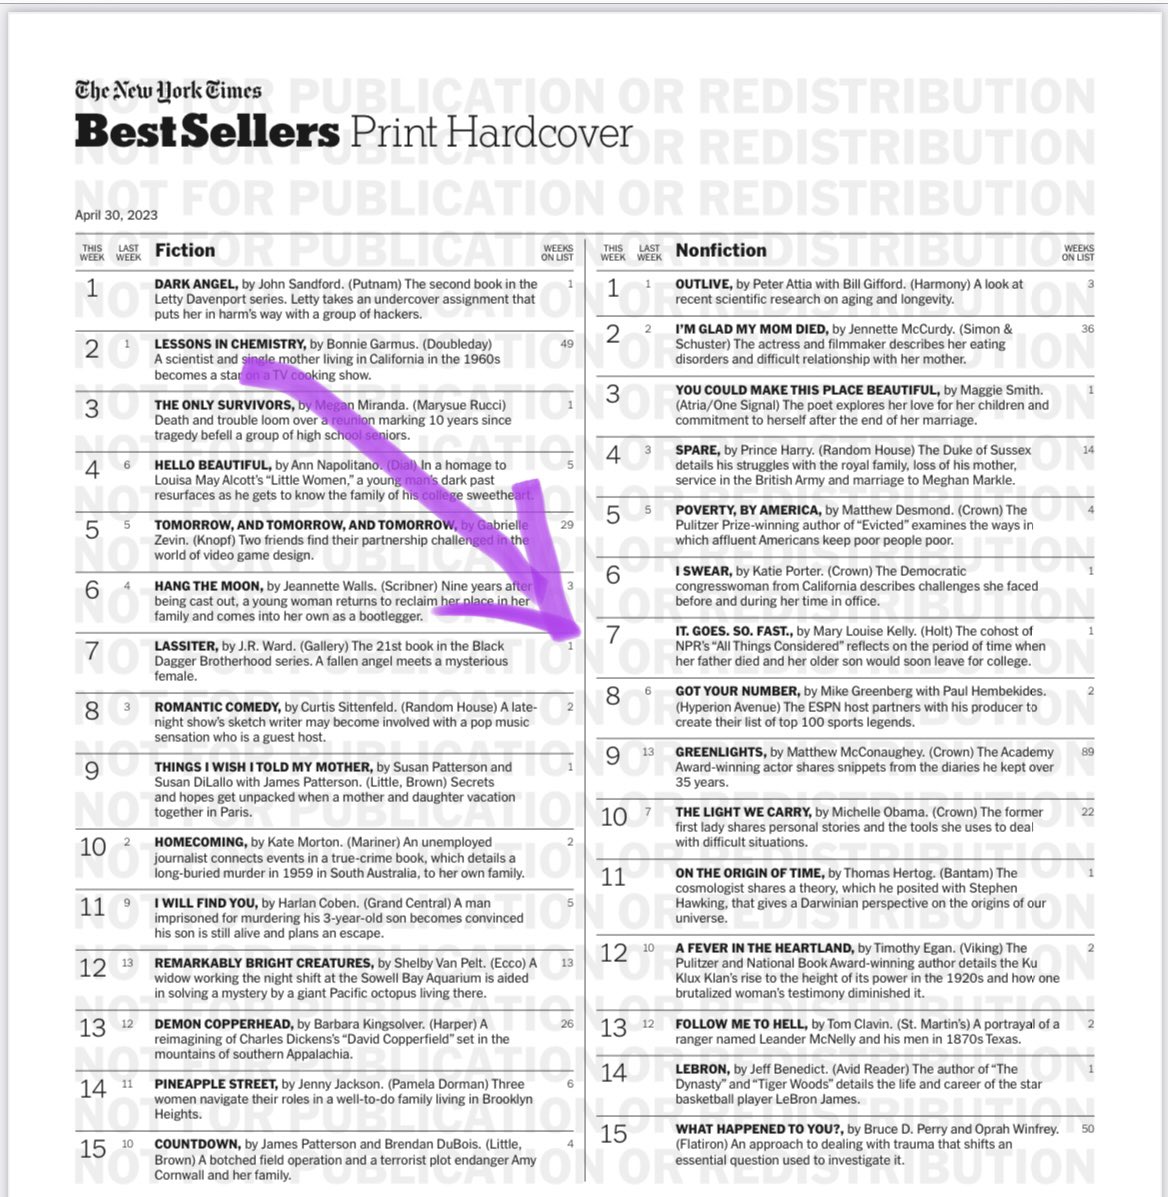 Pinch me. Hit the NYT Bestseller list. Received this news tonight, en route to deliver a book talk in Atlanta. Growing up here in Georgia, I dreamed of being a writer & journalist with stories to tell. Thank for making this girl’s dream come true. 